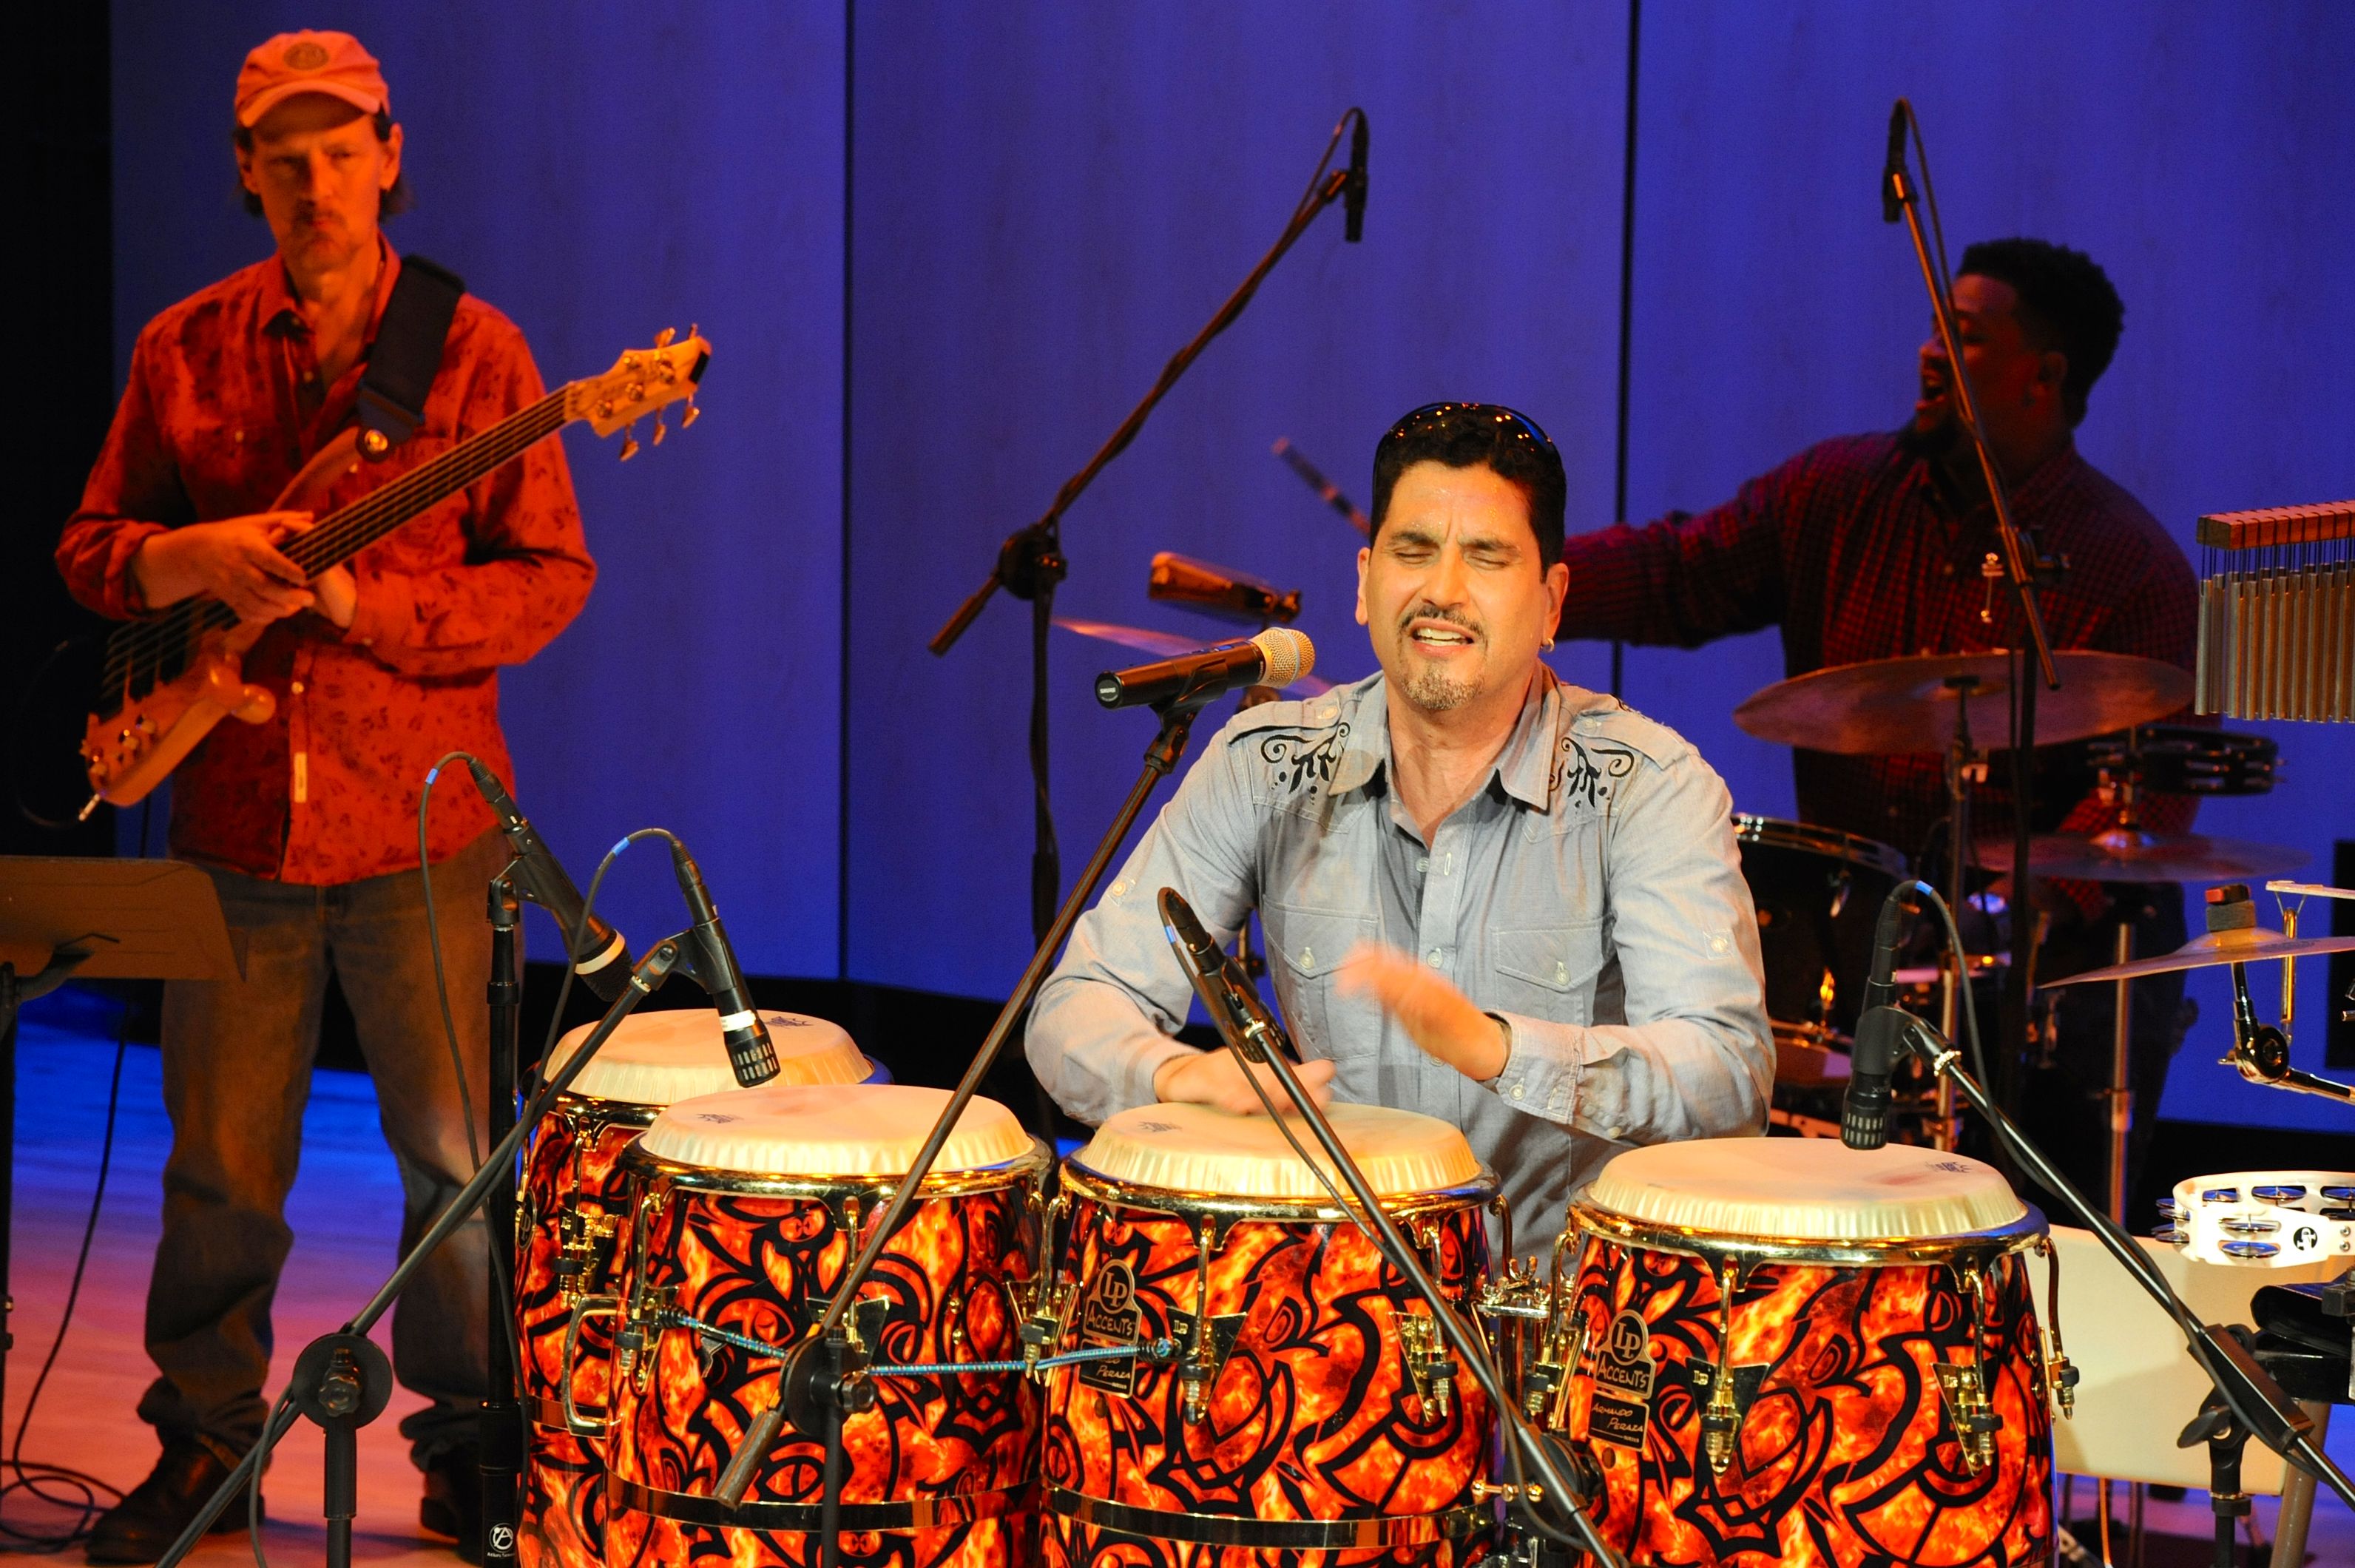 Picture shows Pablo Batista at his four-piece drum set during the middle of a concert. Batista has his eyes closed and his hands flutter above the drum in front of him. He wears a blue long sleeve shirt with dark blue ornamental details at the shoulders. A fellow musician with a guitar strapped over his shoulder stands to Batista’s right. Another drummer, seated at his drum set, plays behind Batista. [end of description]